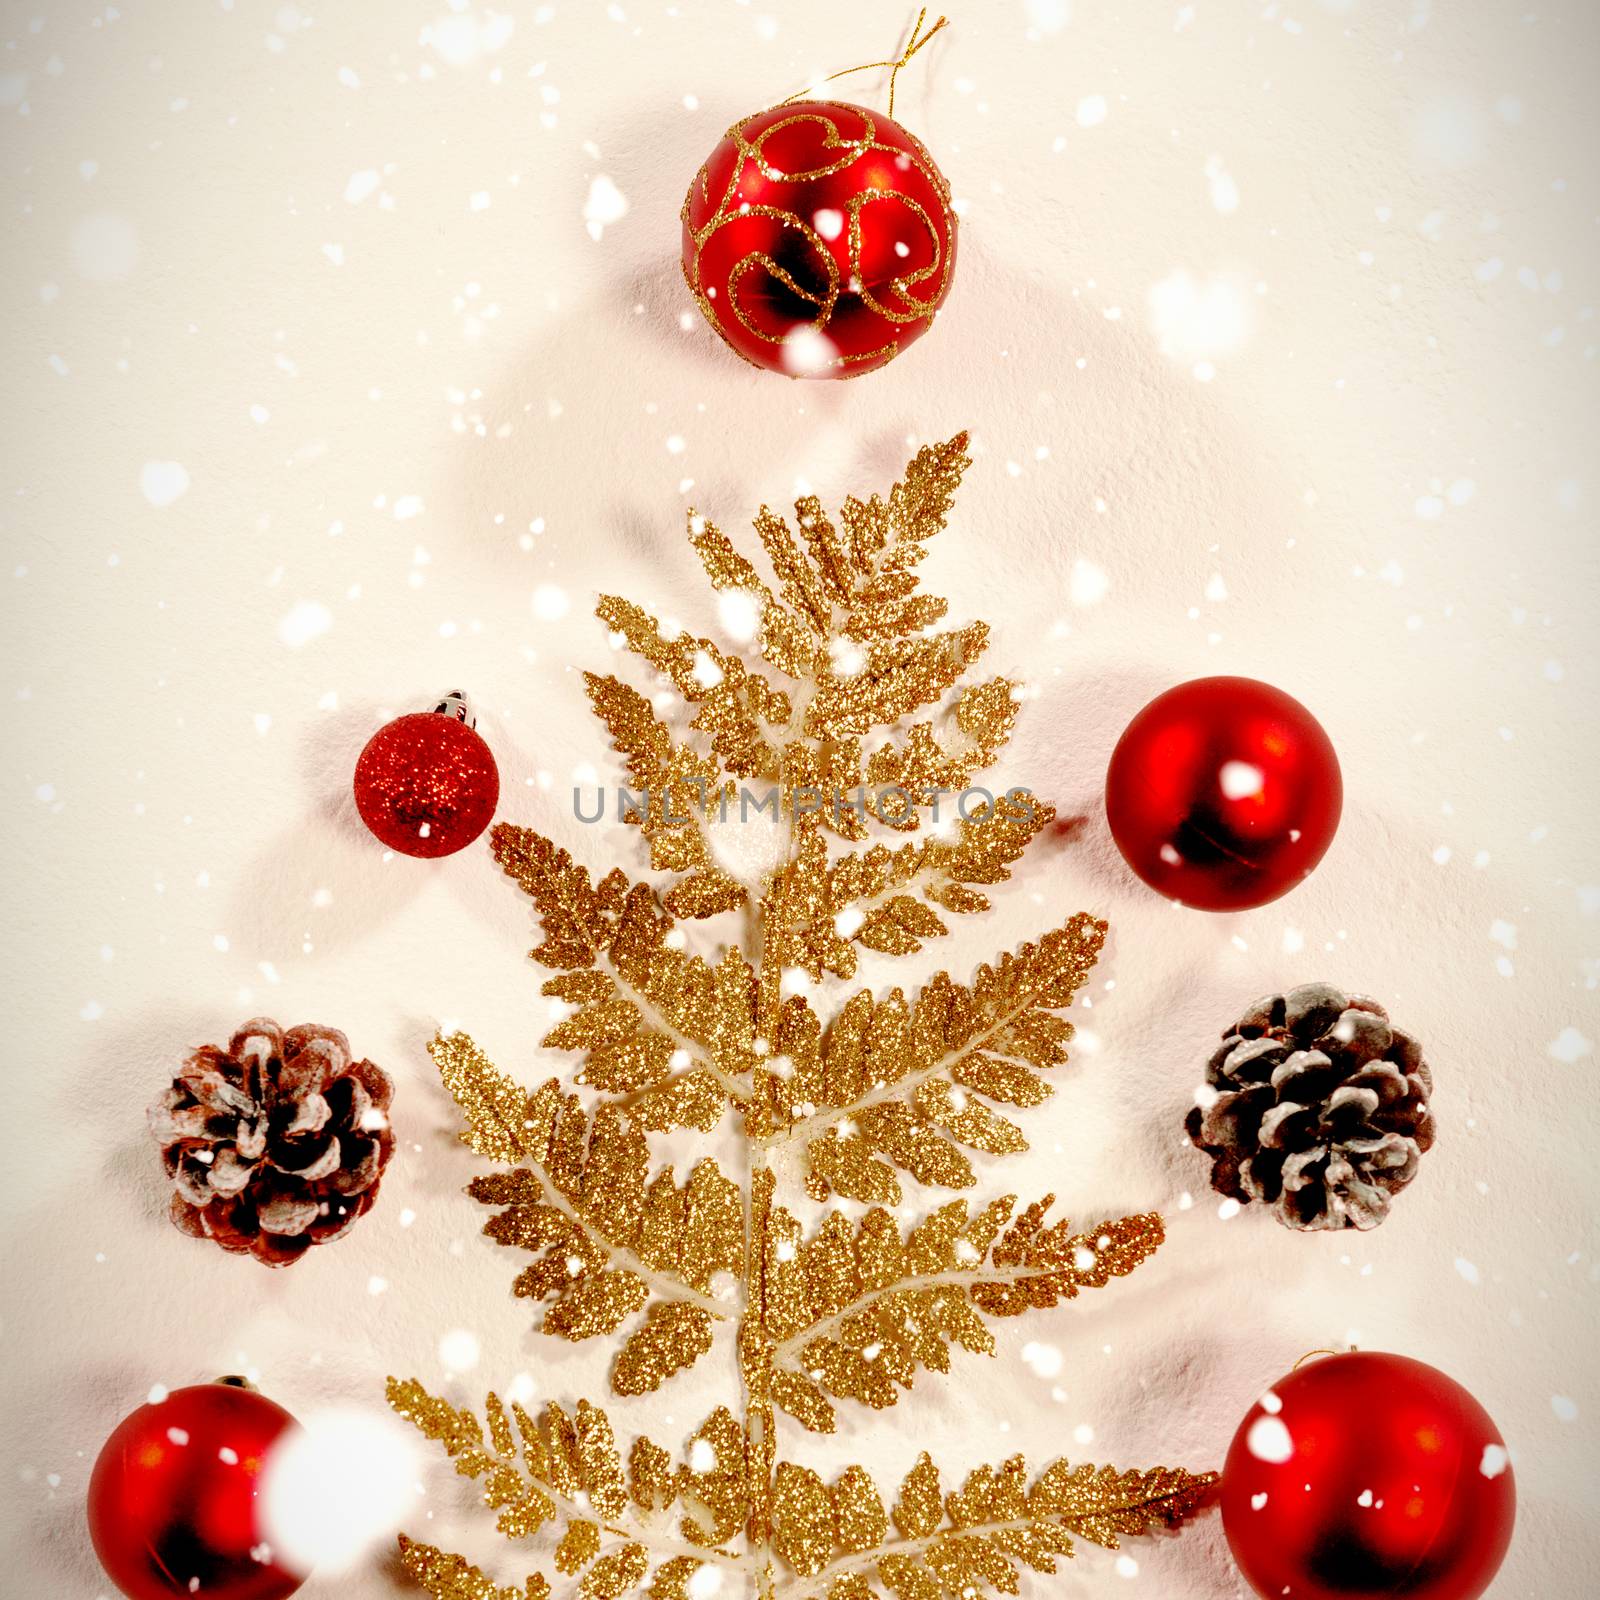 Snow falling against ornaments and decorations with a christmas pine tree shape